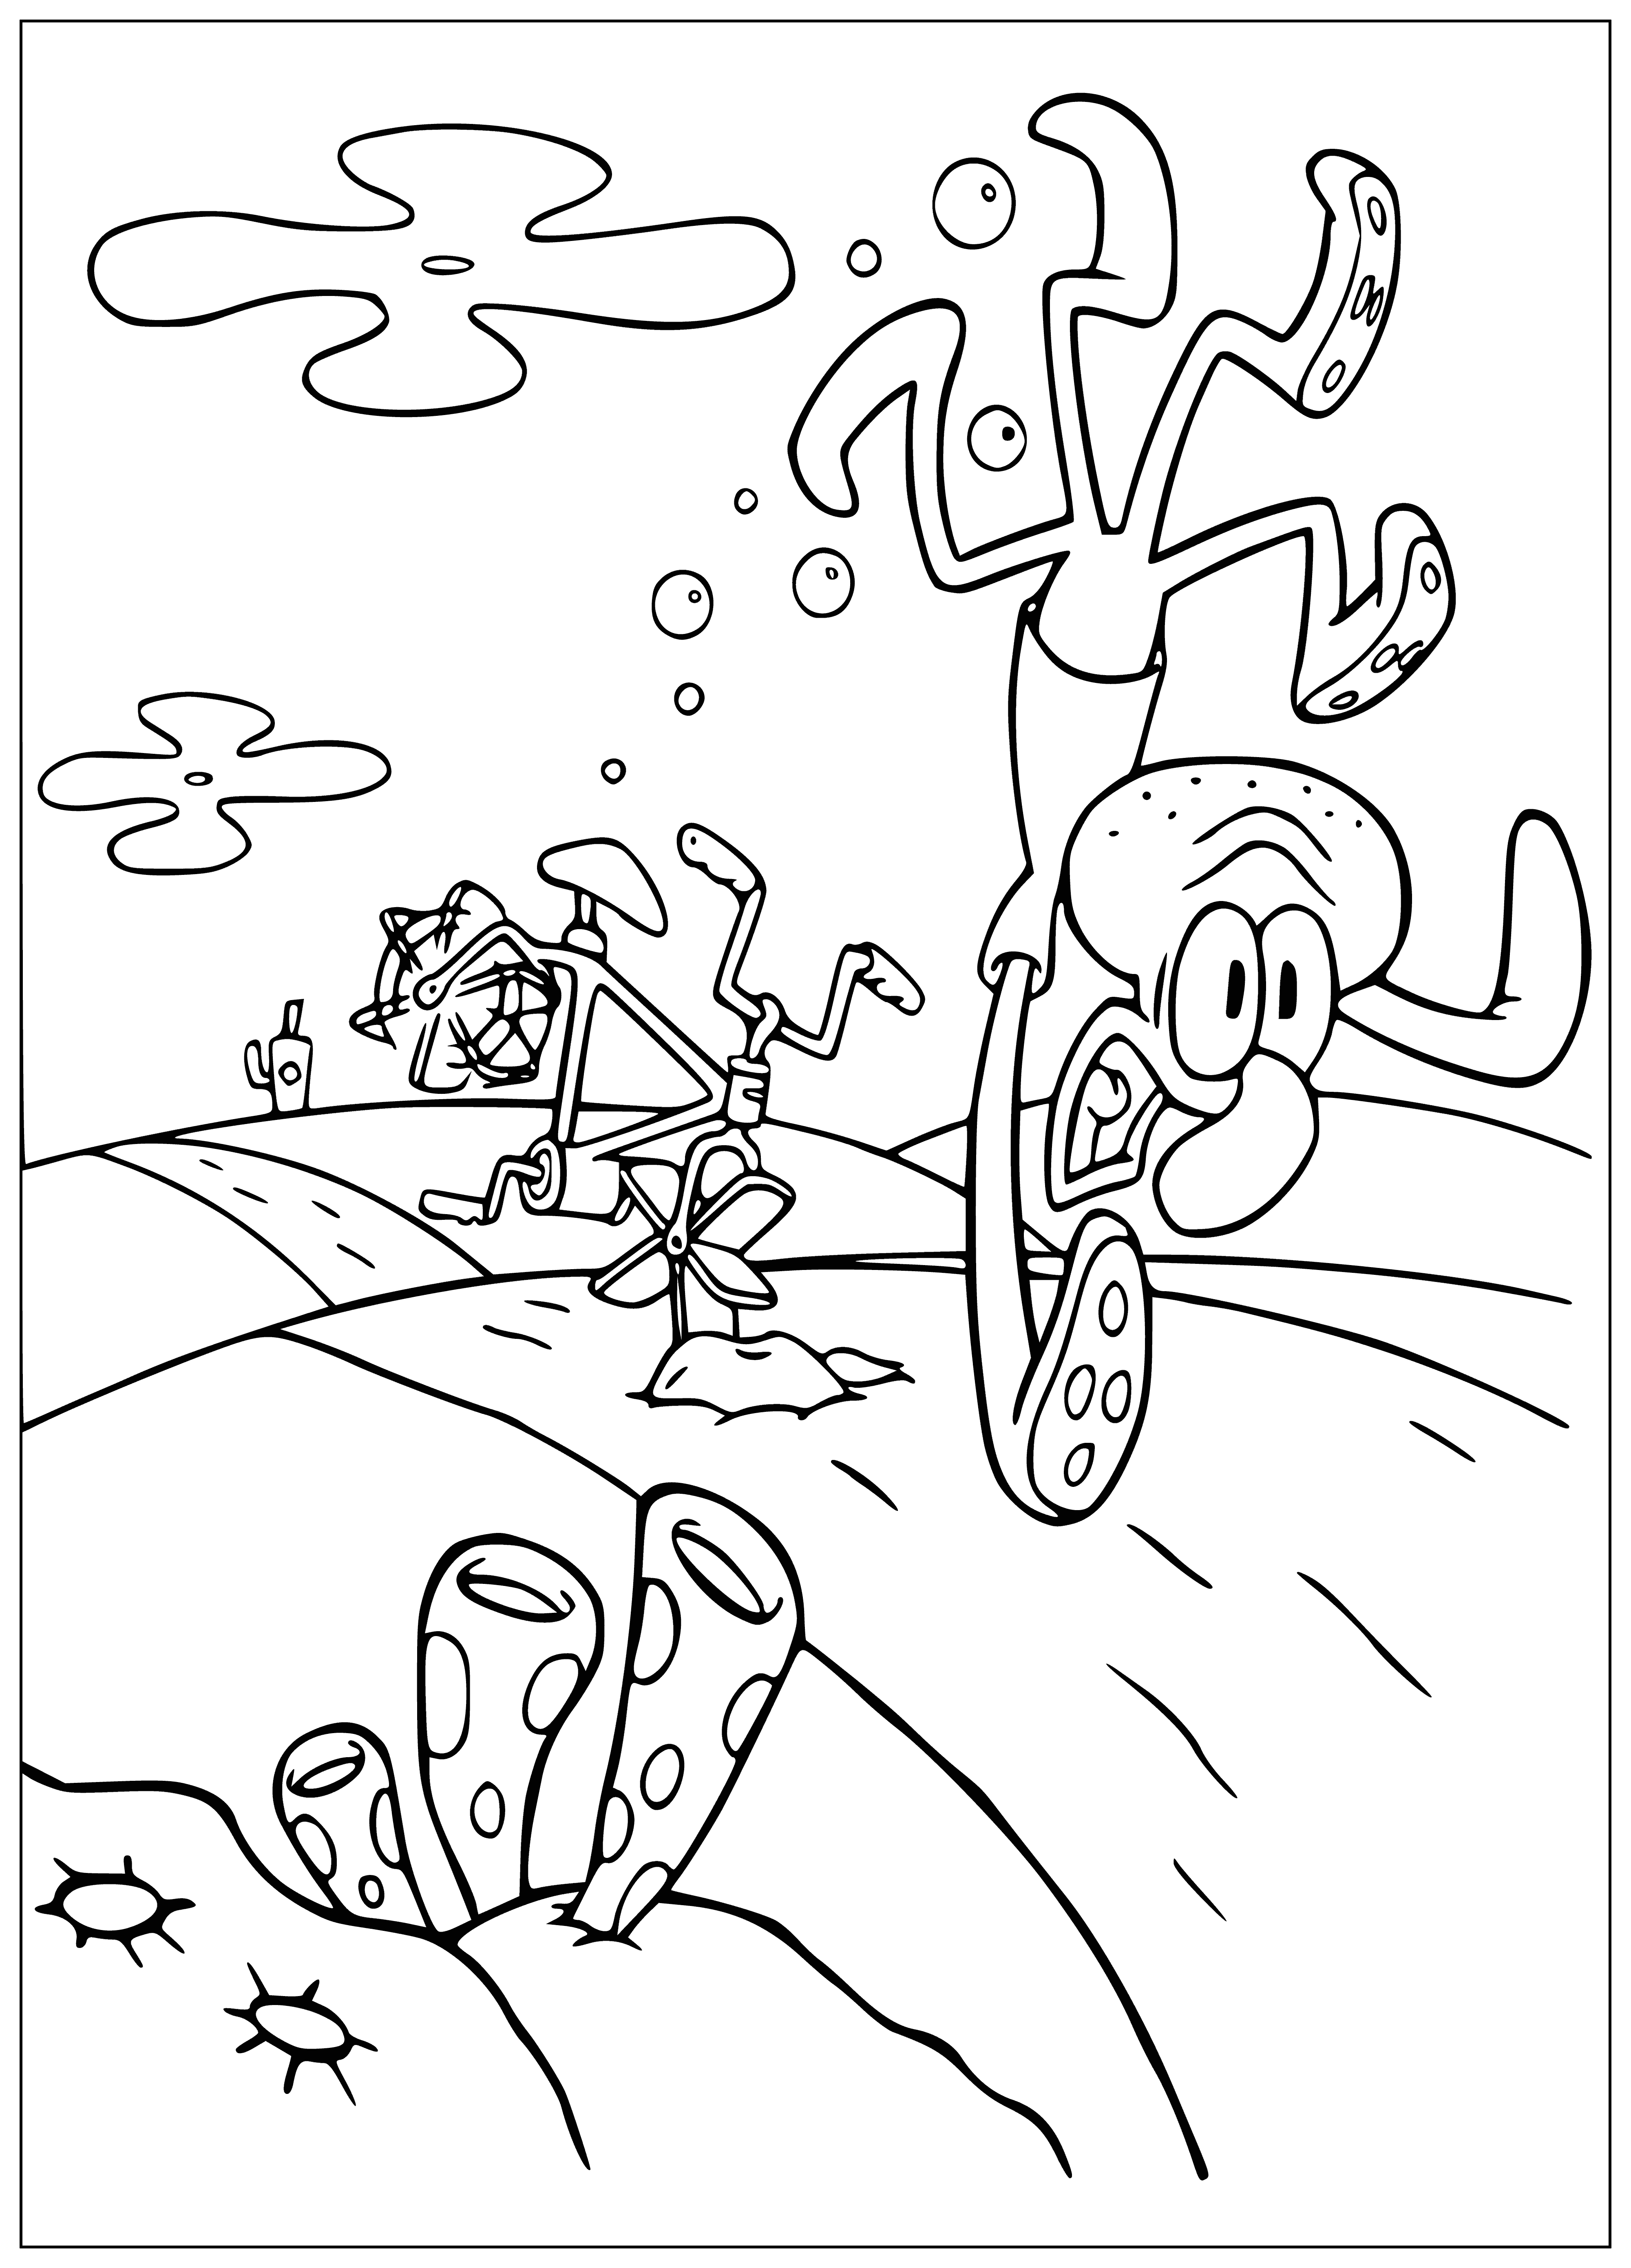 coloring page: SpongeBob falls off bike, looks surprised while bike lies on ground next to him.